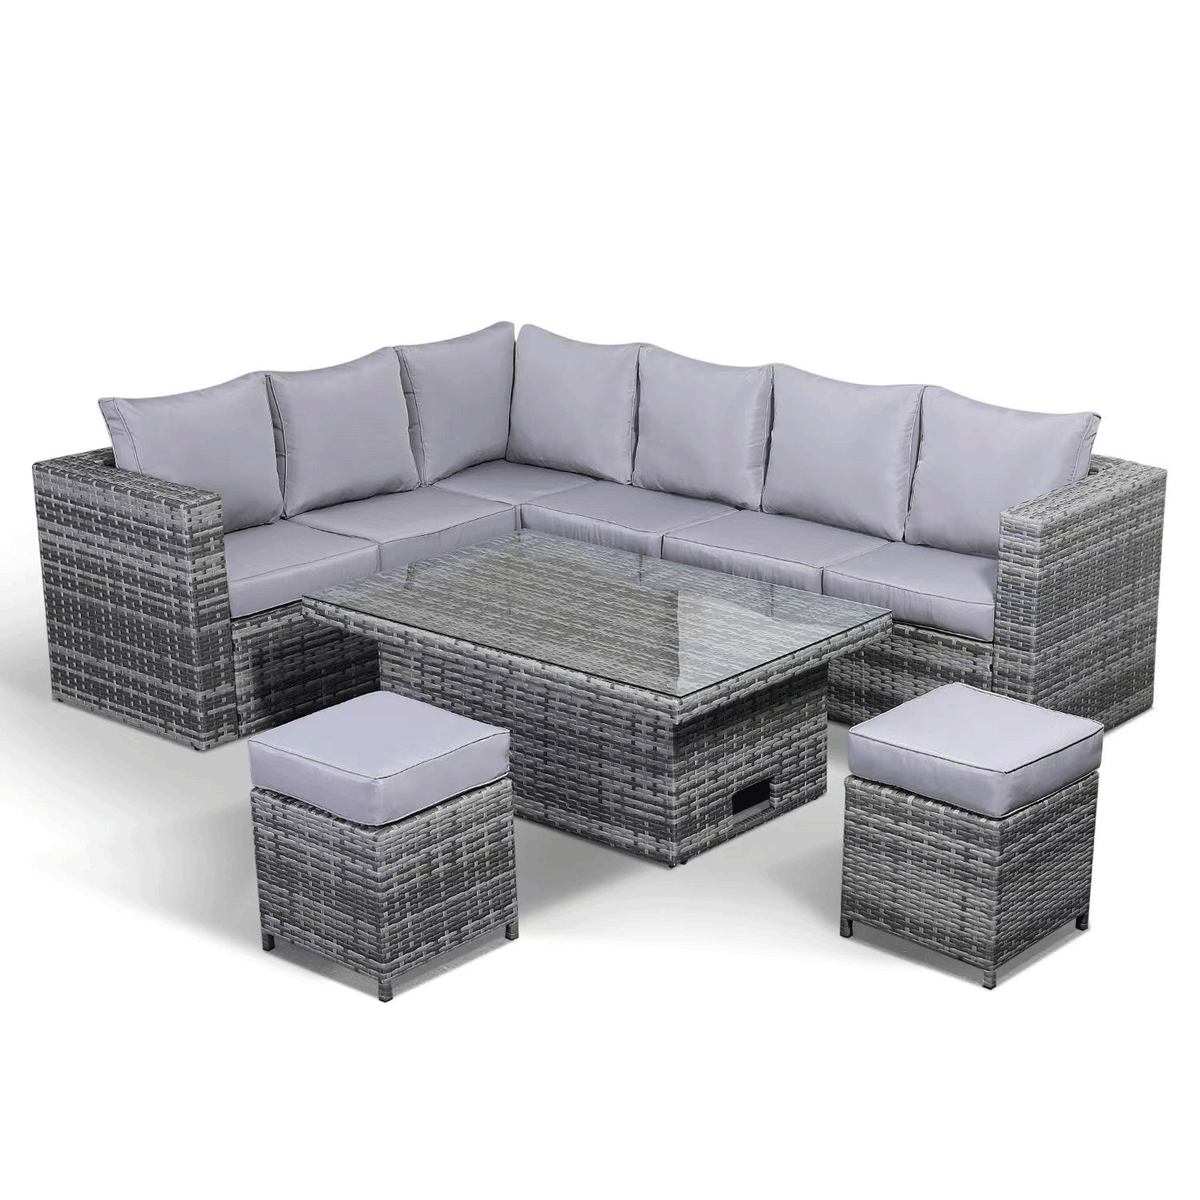 5 Pieces Modular Outdoor Sectional Wicker Patio Furniture with Rising Table and Cushions